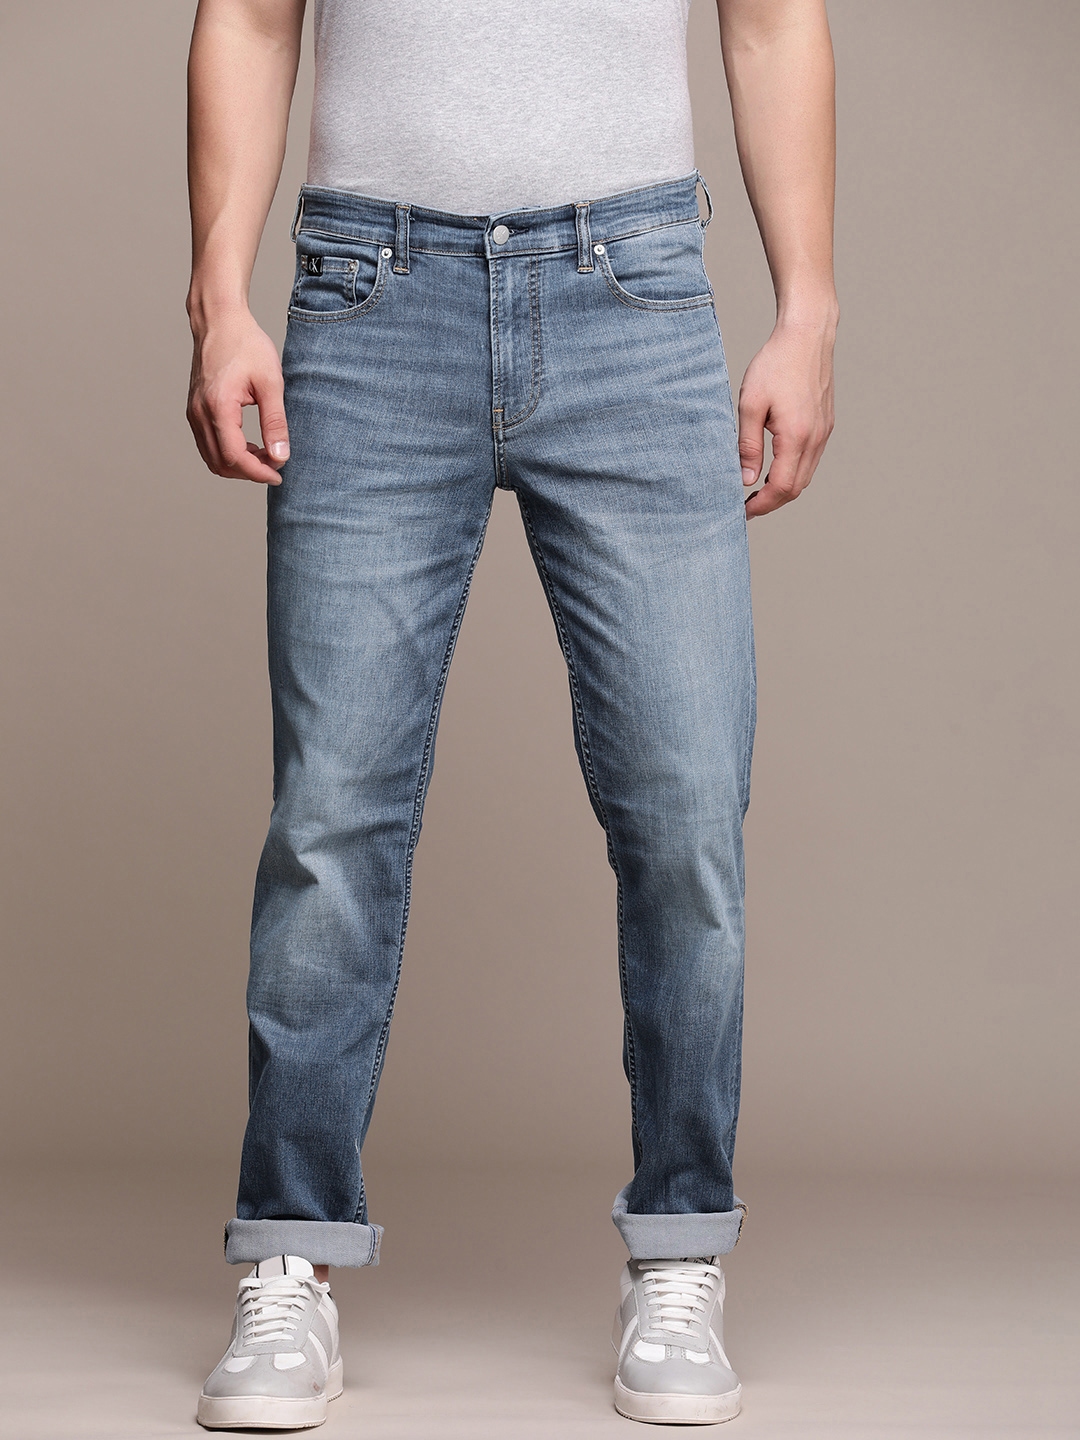 Buy Calvin Klein Jeans Skinny | Jeans 21085500 Fit Men Fade Light Mid - Rise for Jeans Myntra Stretchable